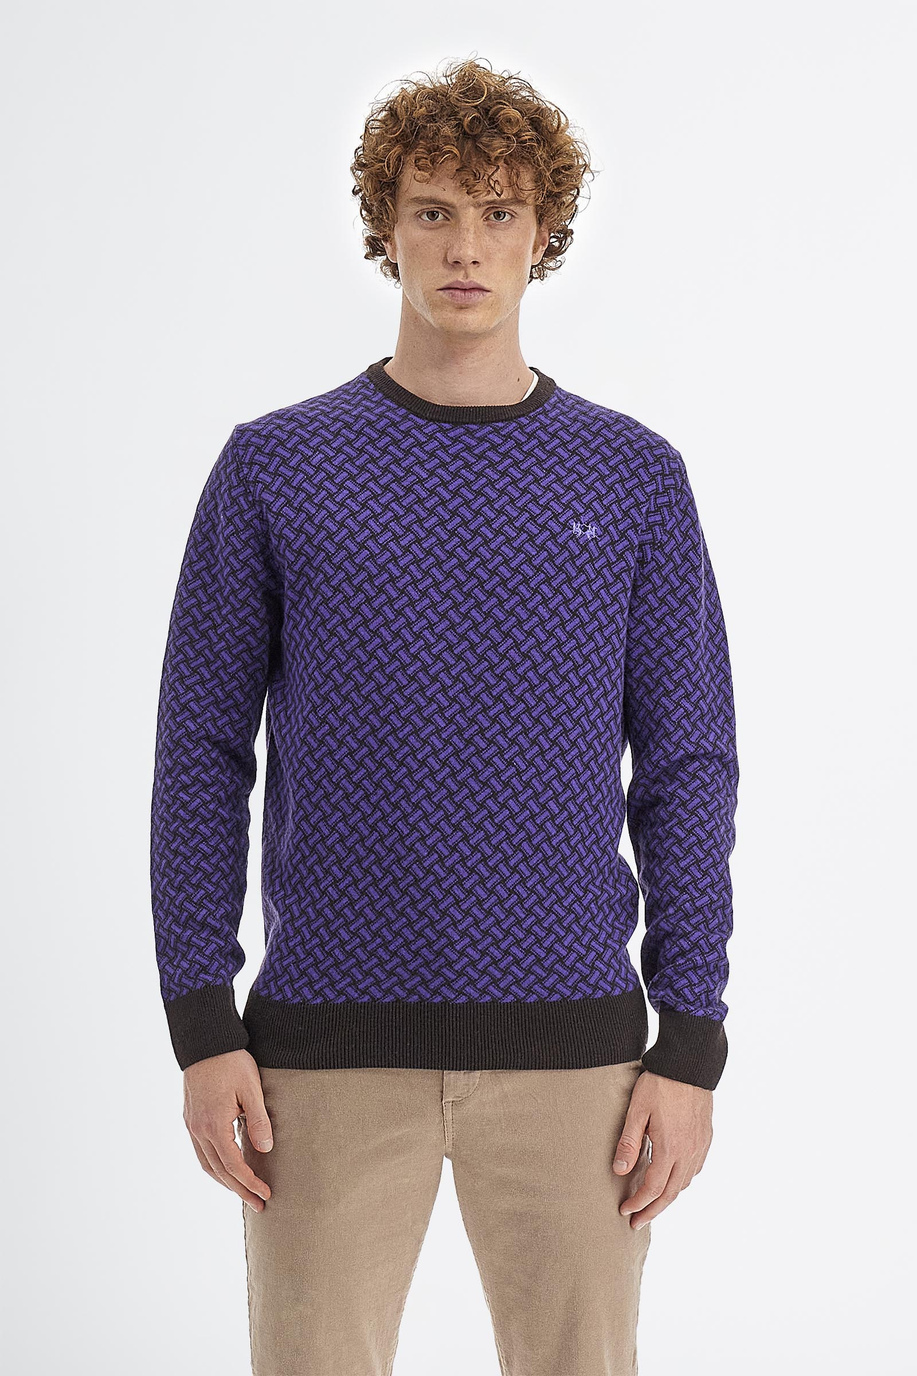 Men’s crew neck sweater Argentina with long sleeves in regular fit cashmere merino wool blend - Premium wools | La Martina - Official Online Shop